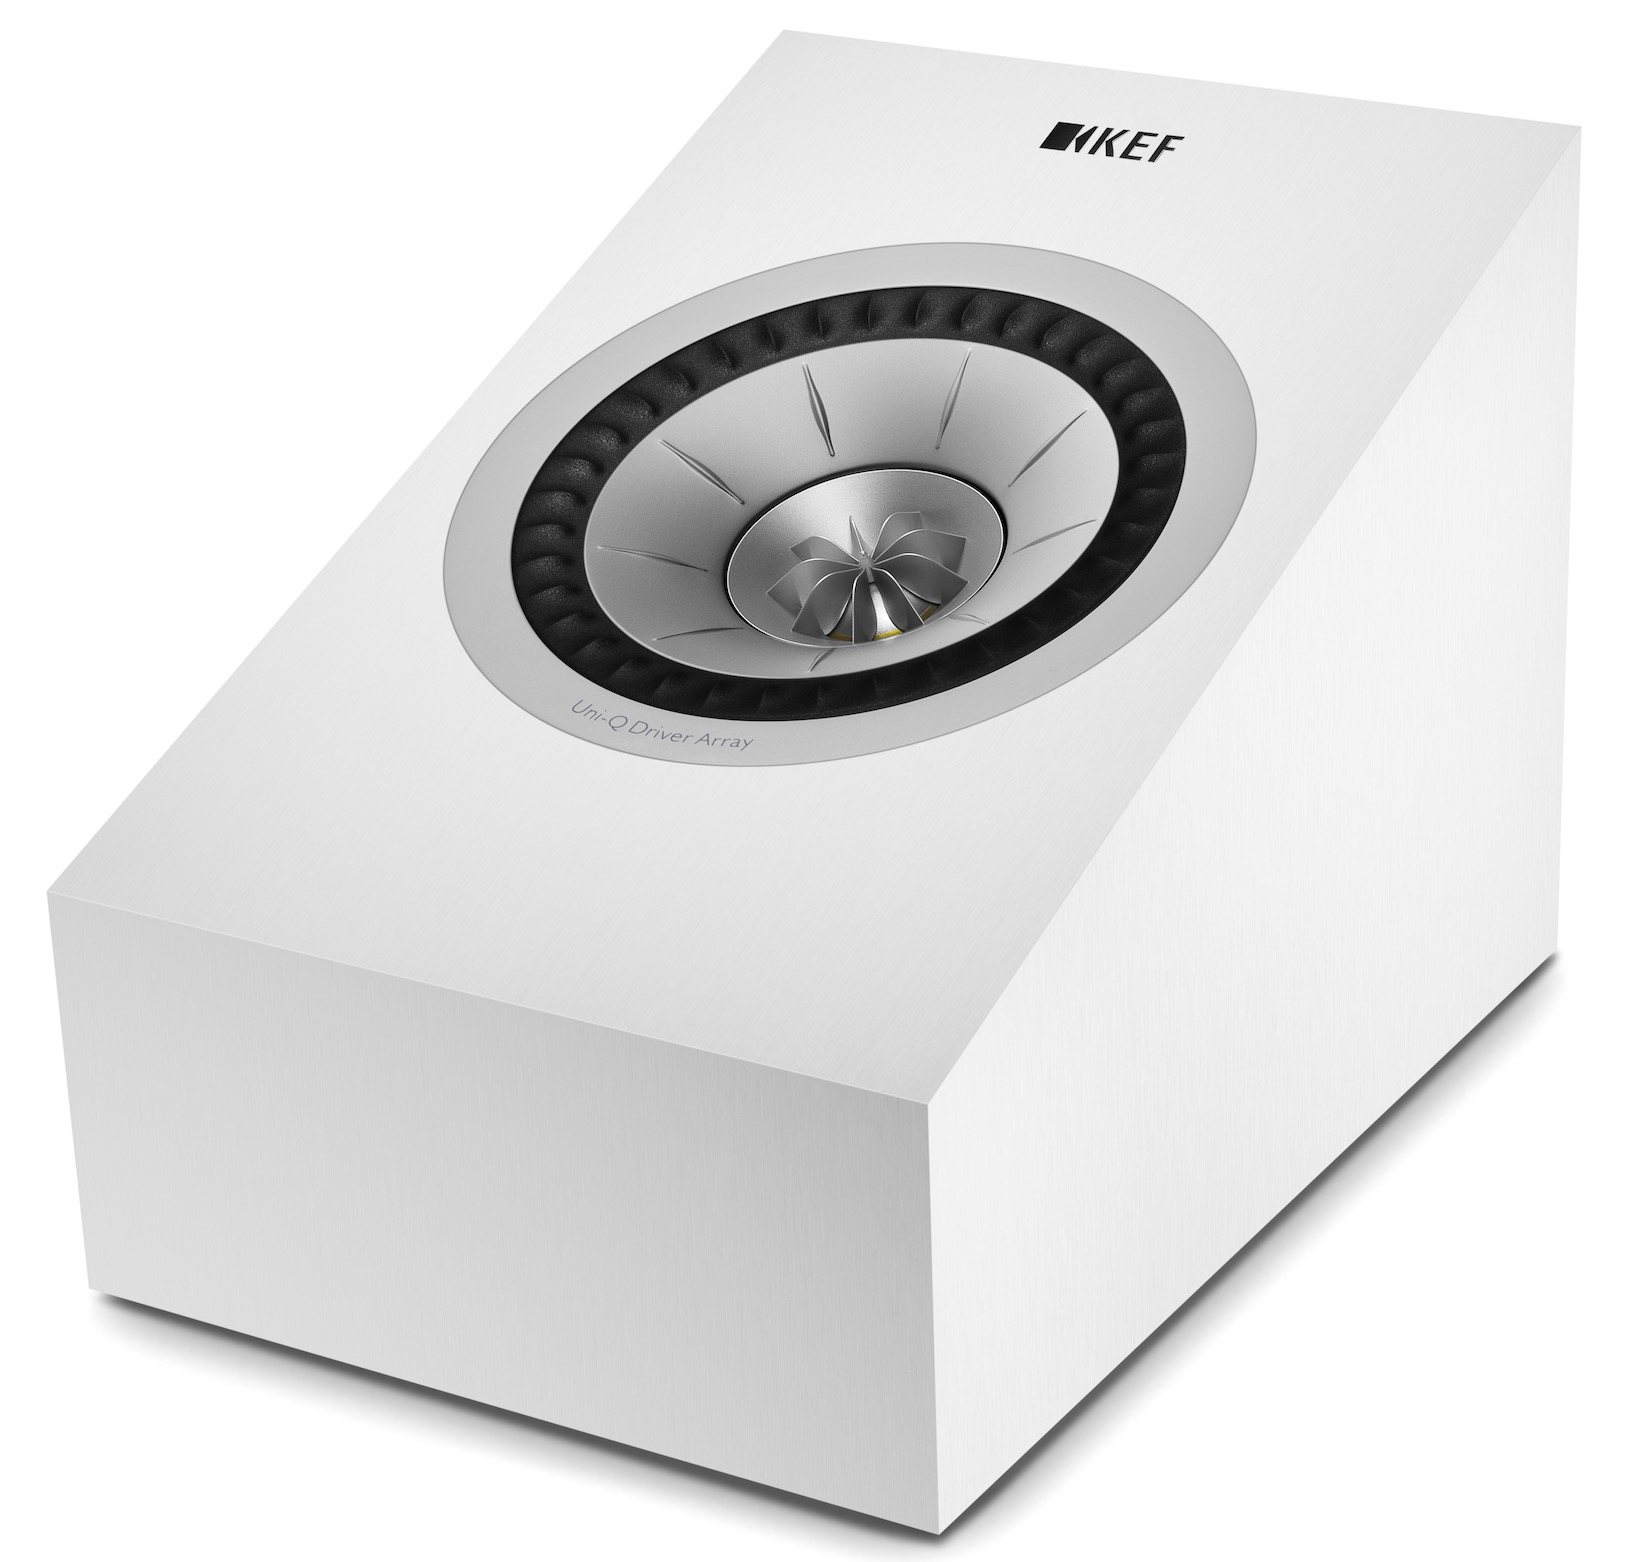 Q50a Dolby Atmos-enabled surround speaker from KEF